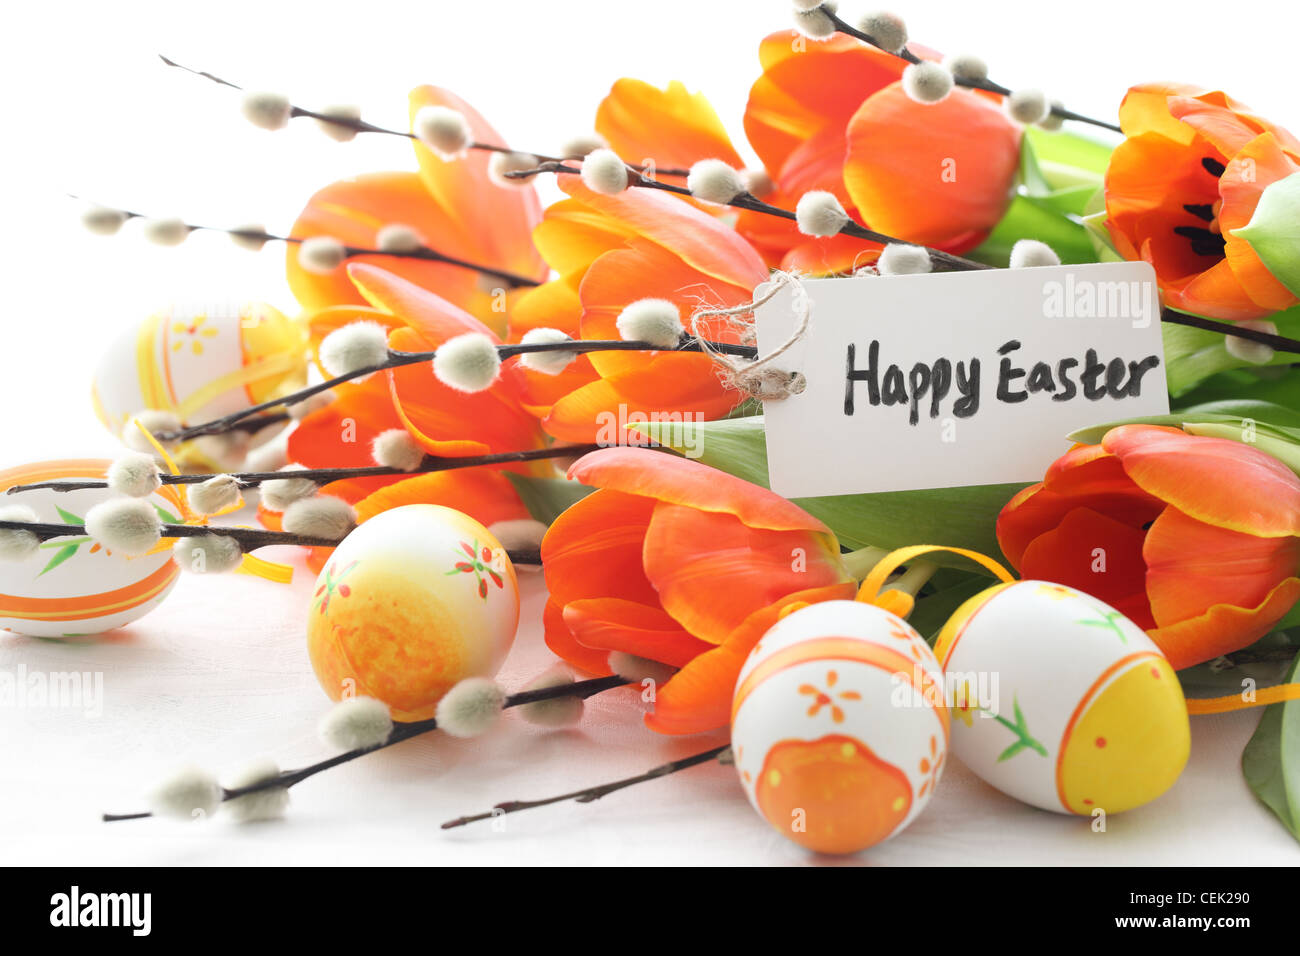 Easter eggs,tulips,silver-bud willow and card,Happy easter. Stock Photo